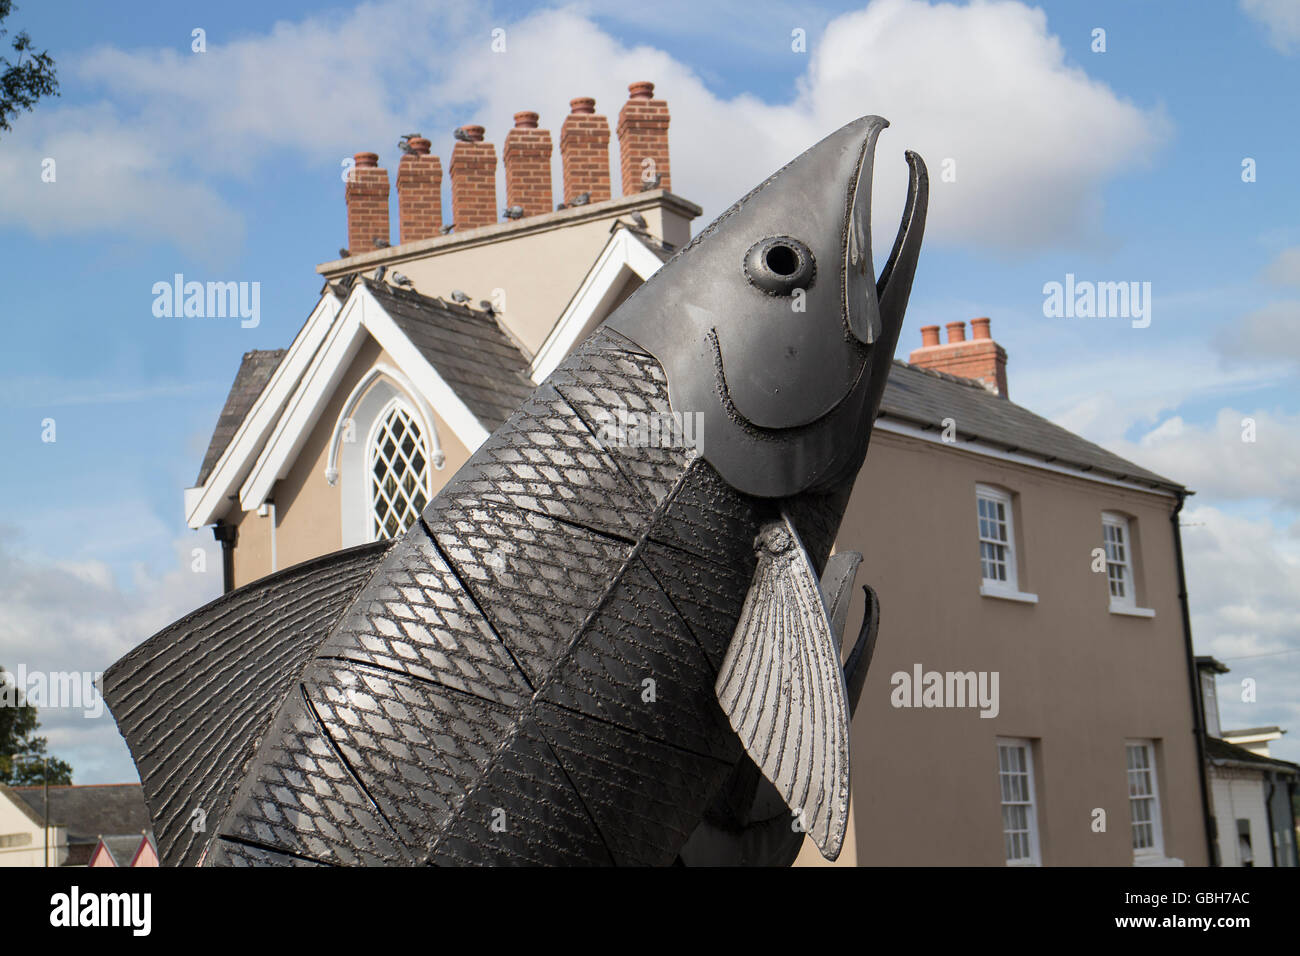 Leaping salmon sculpture by Walenty Pytel, Ross-on-Wye, Herefordshire Stock Photo